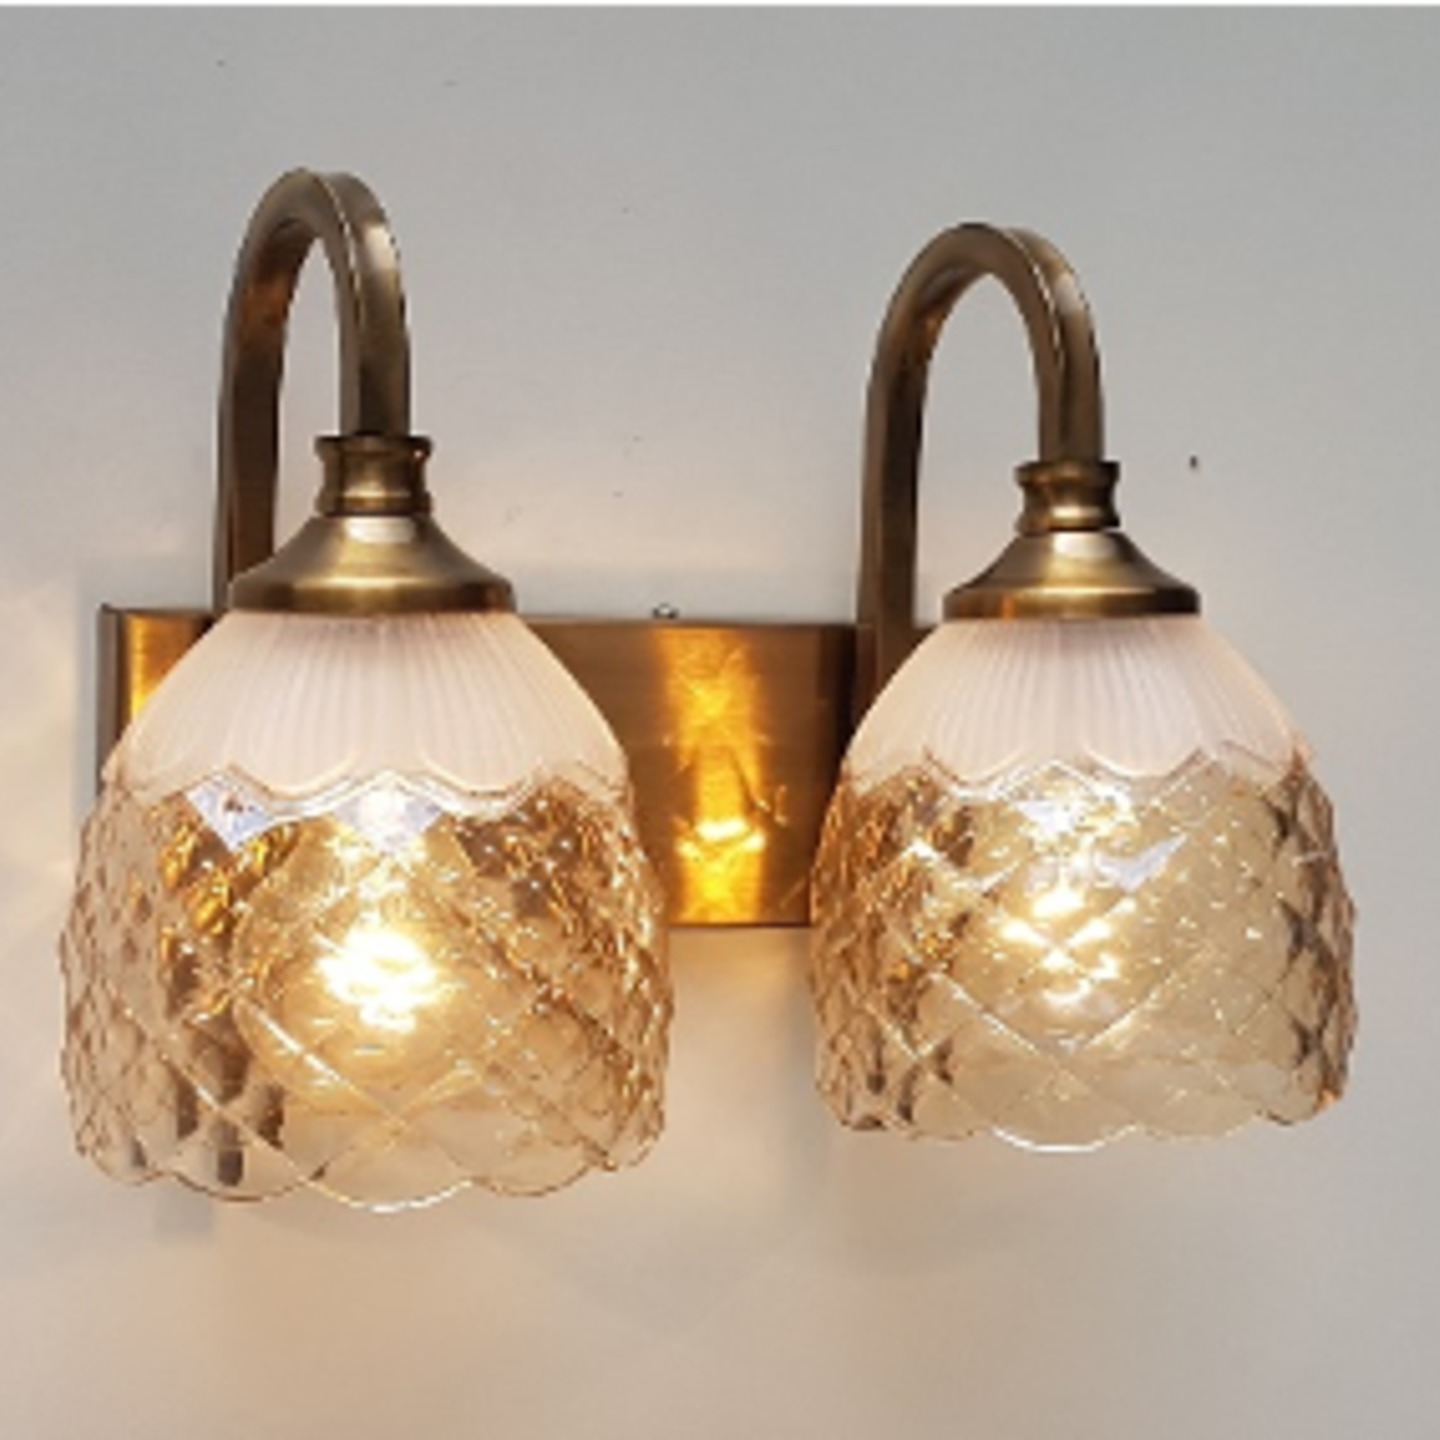 Vintage Double Wall Light